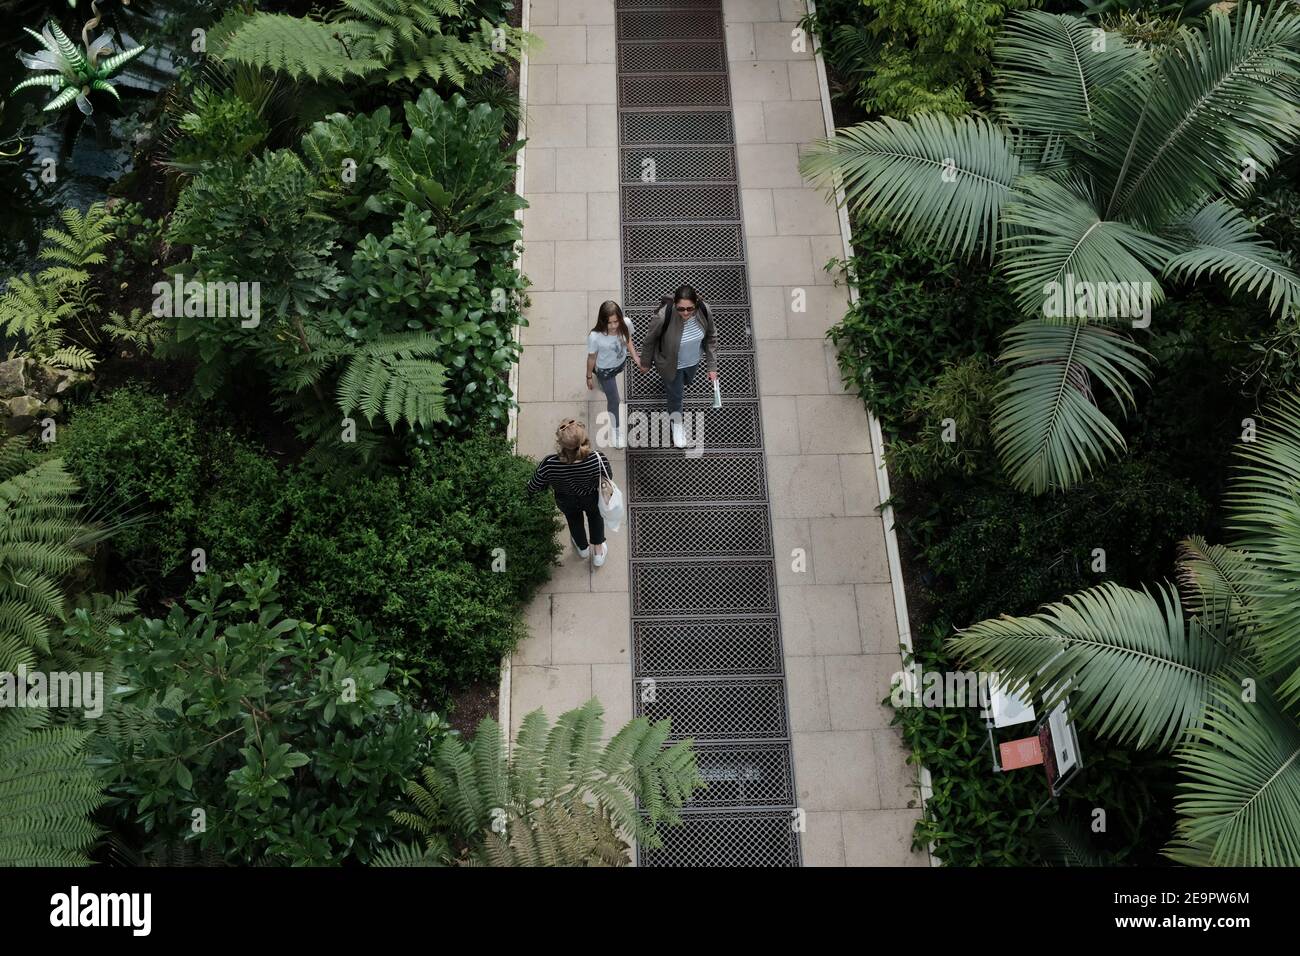 LONDON - 2019: Interior of the Temperate House at Kew Royal Botanic Gardens in London. A mother and her daughter walk through the garden holding hands Stock Photo